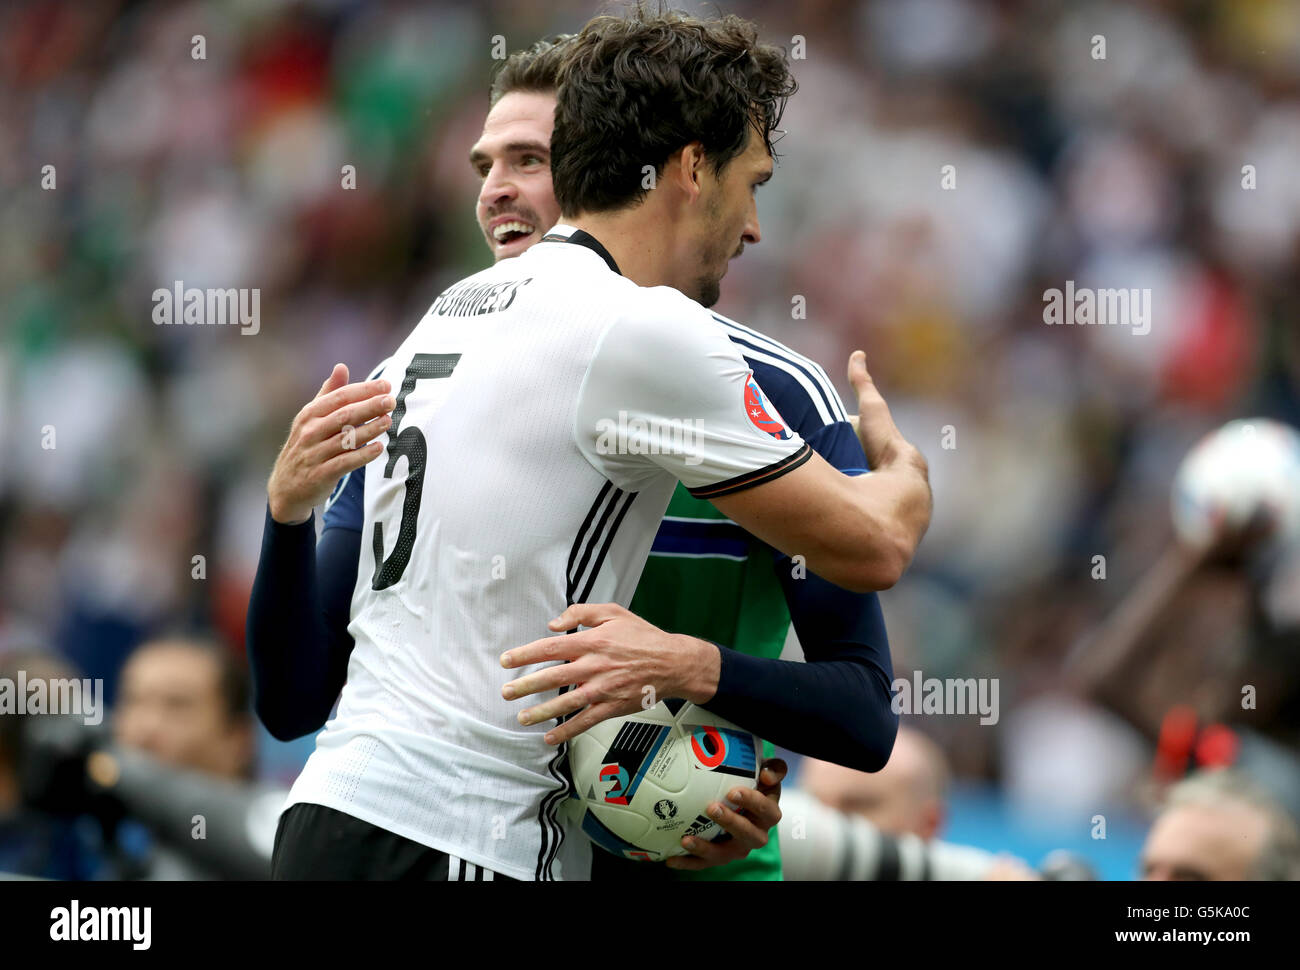 Germany's Mats Hummels, centre, heads on goal during the Euro 2020